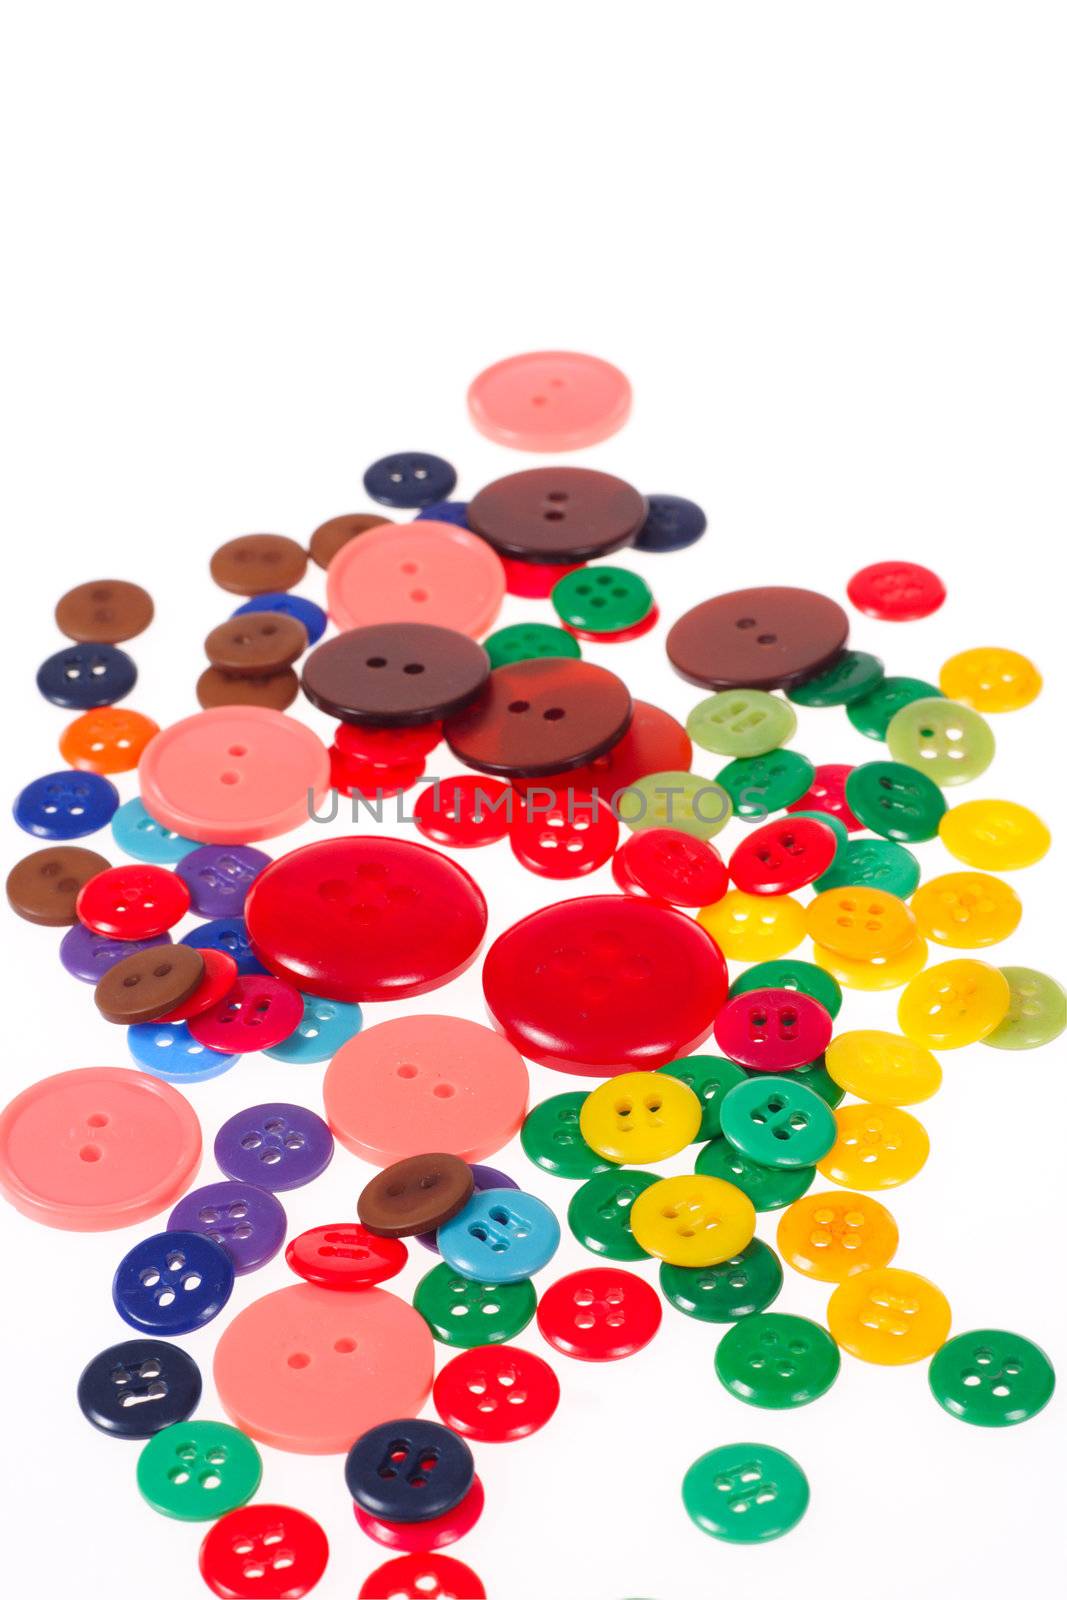 Many different sized and shaped buttons photo on white background